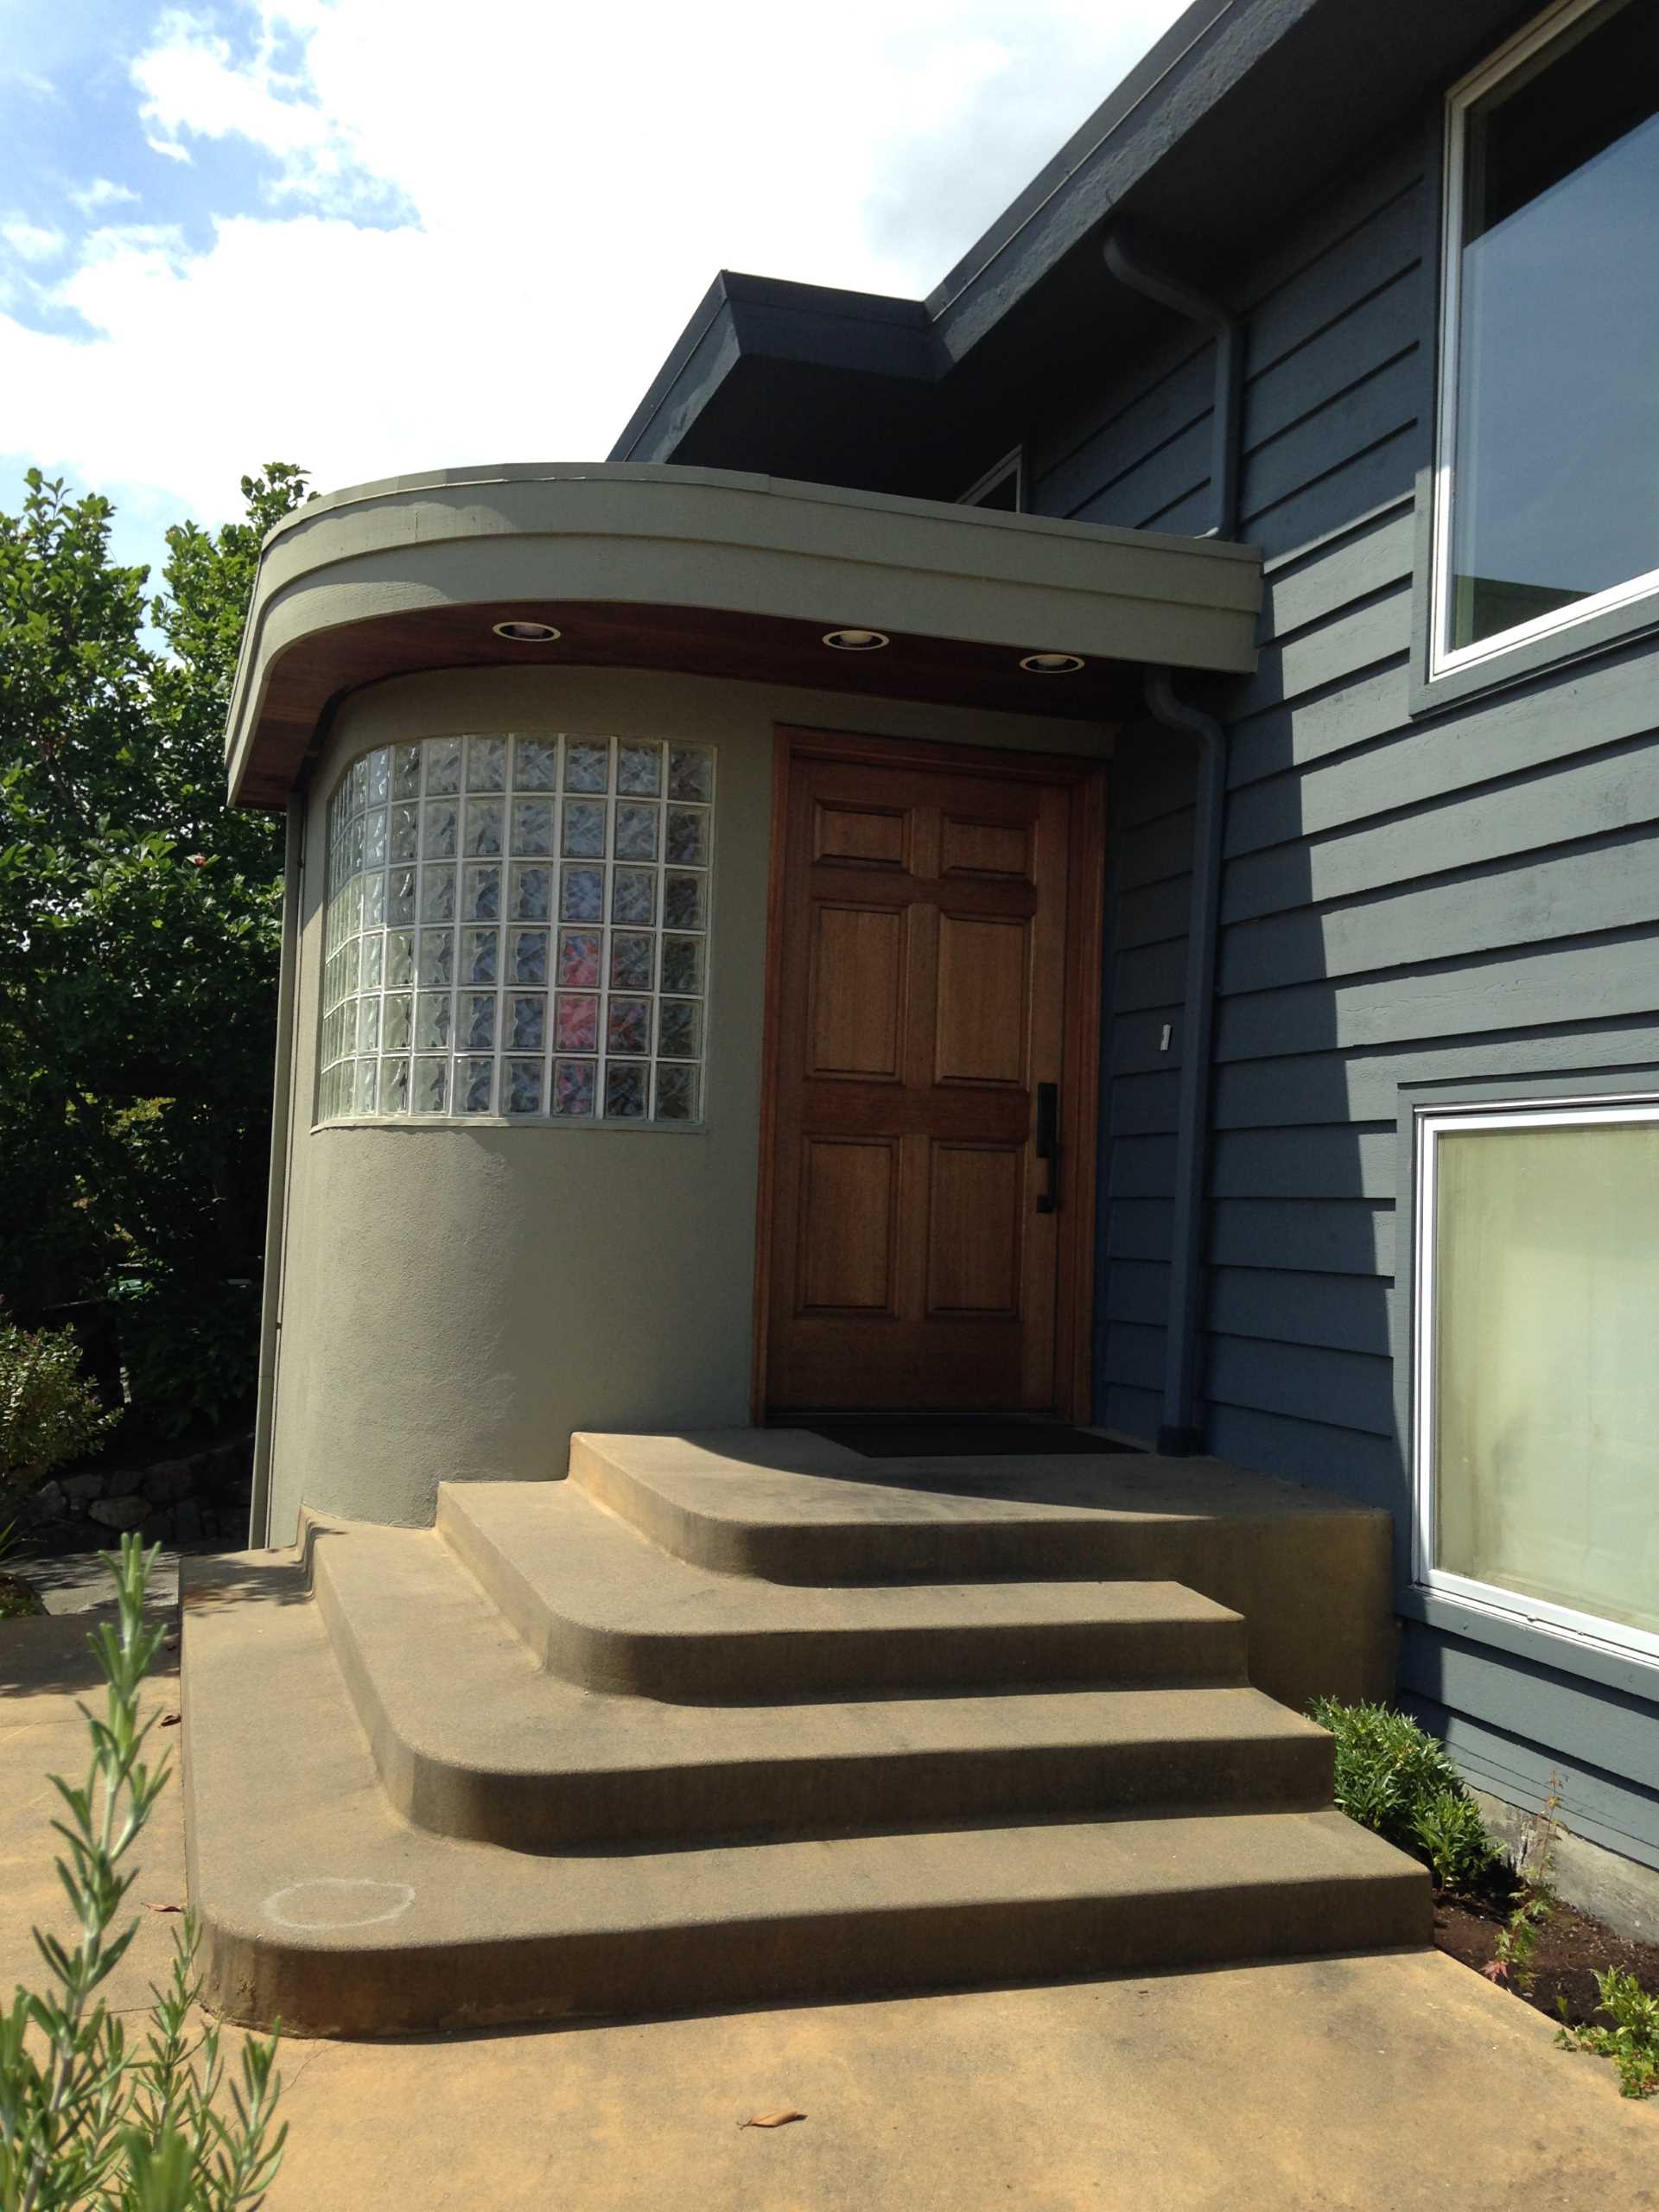 Before - The original front door was a solid wood wood nestled within a protruding addition with glass blocks.